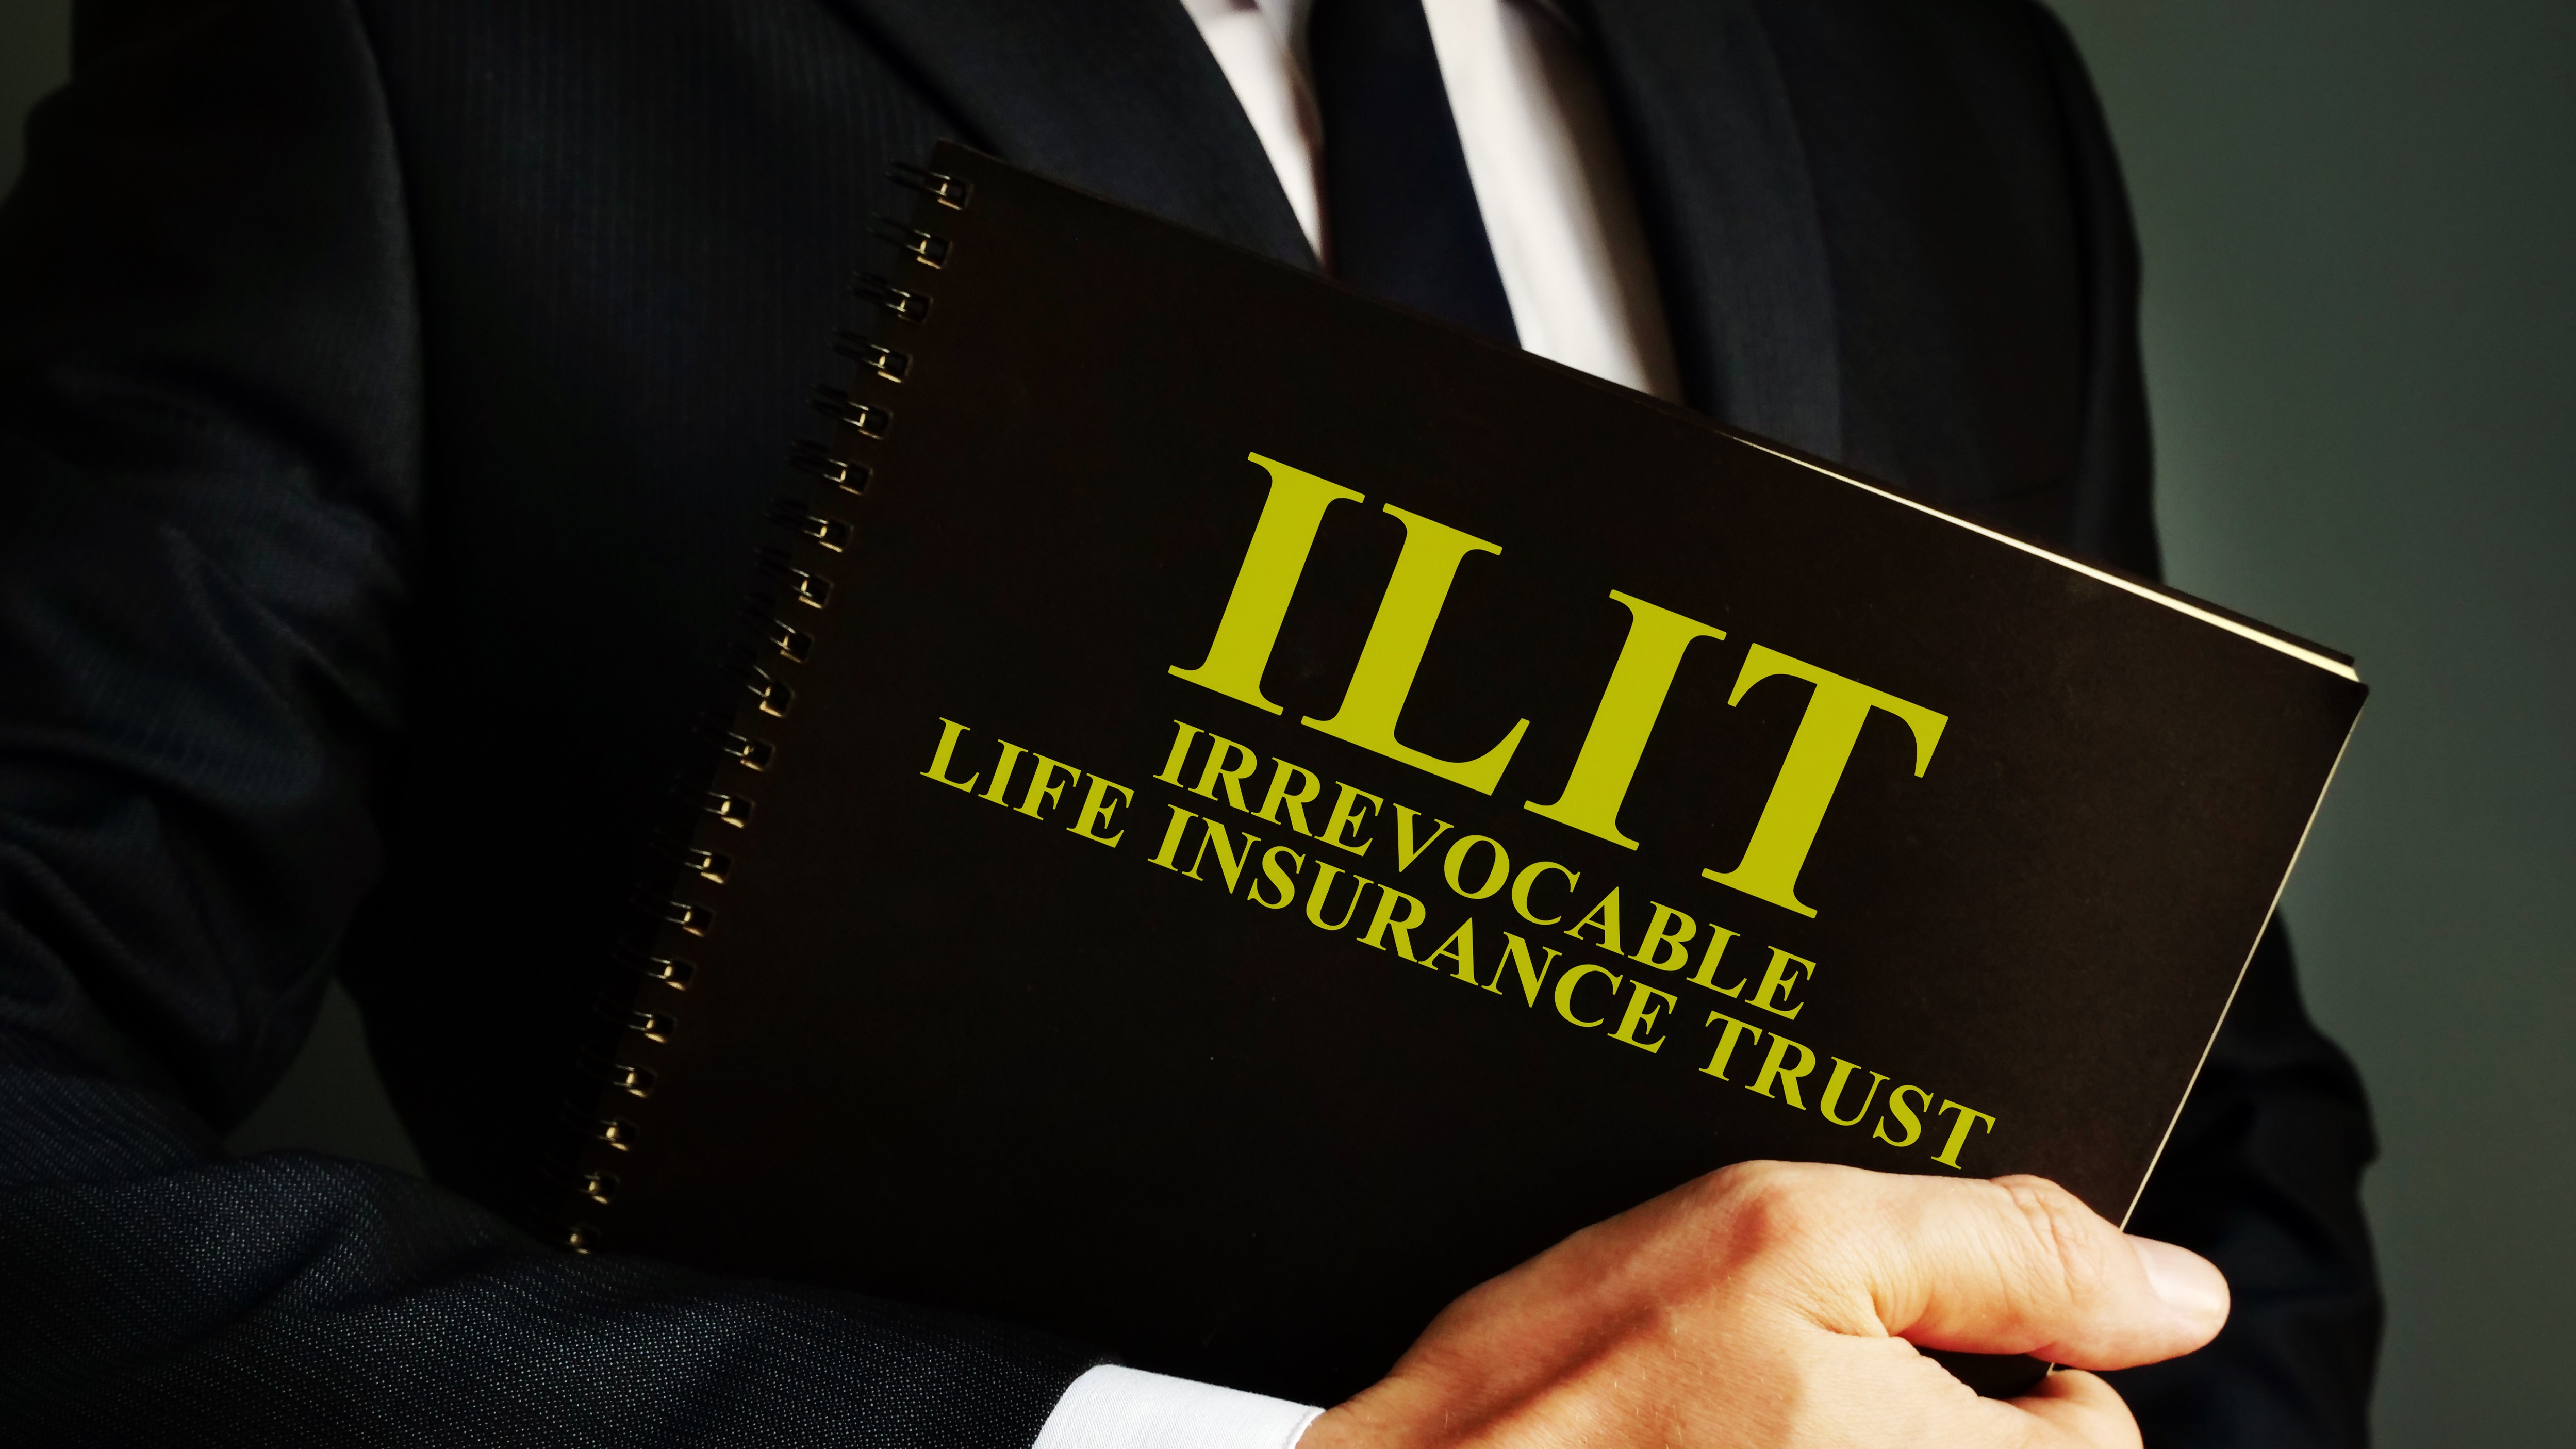 APEG Why Now? The Return of the Irrevocable Life Insurance Trust (I.L.I.T.)